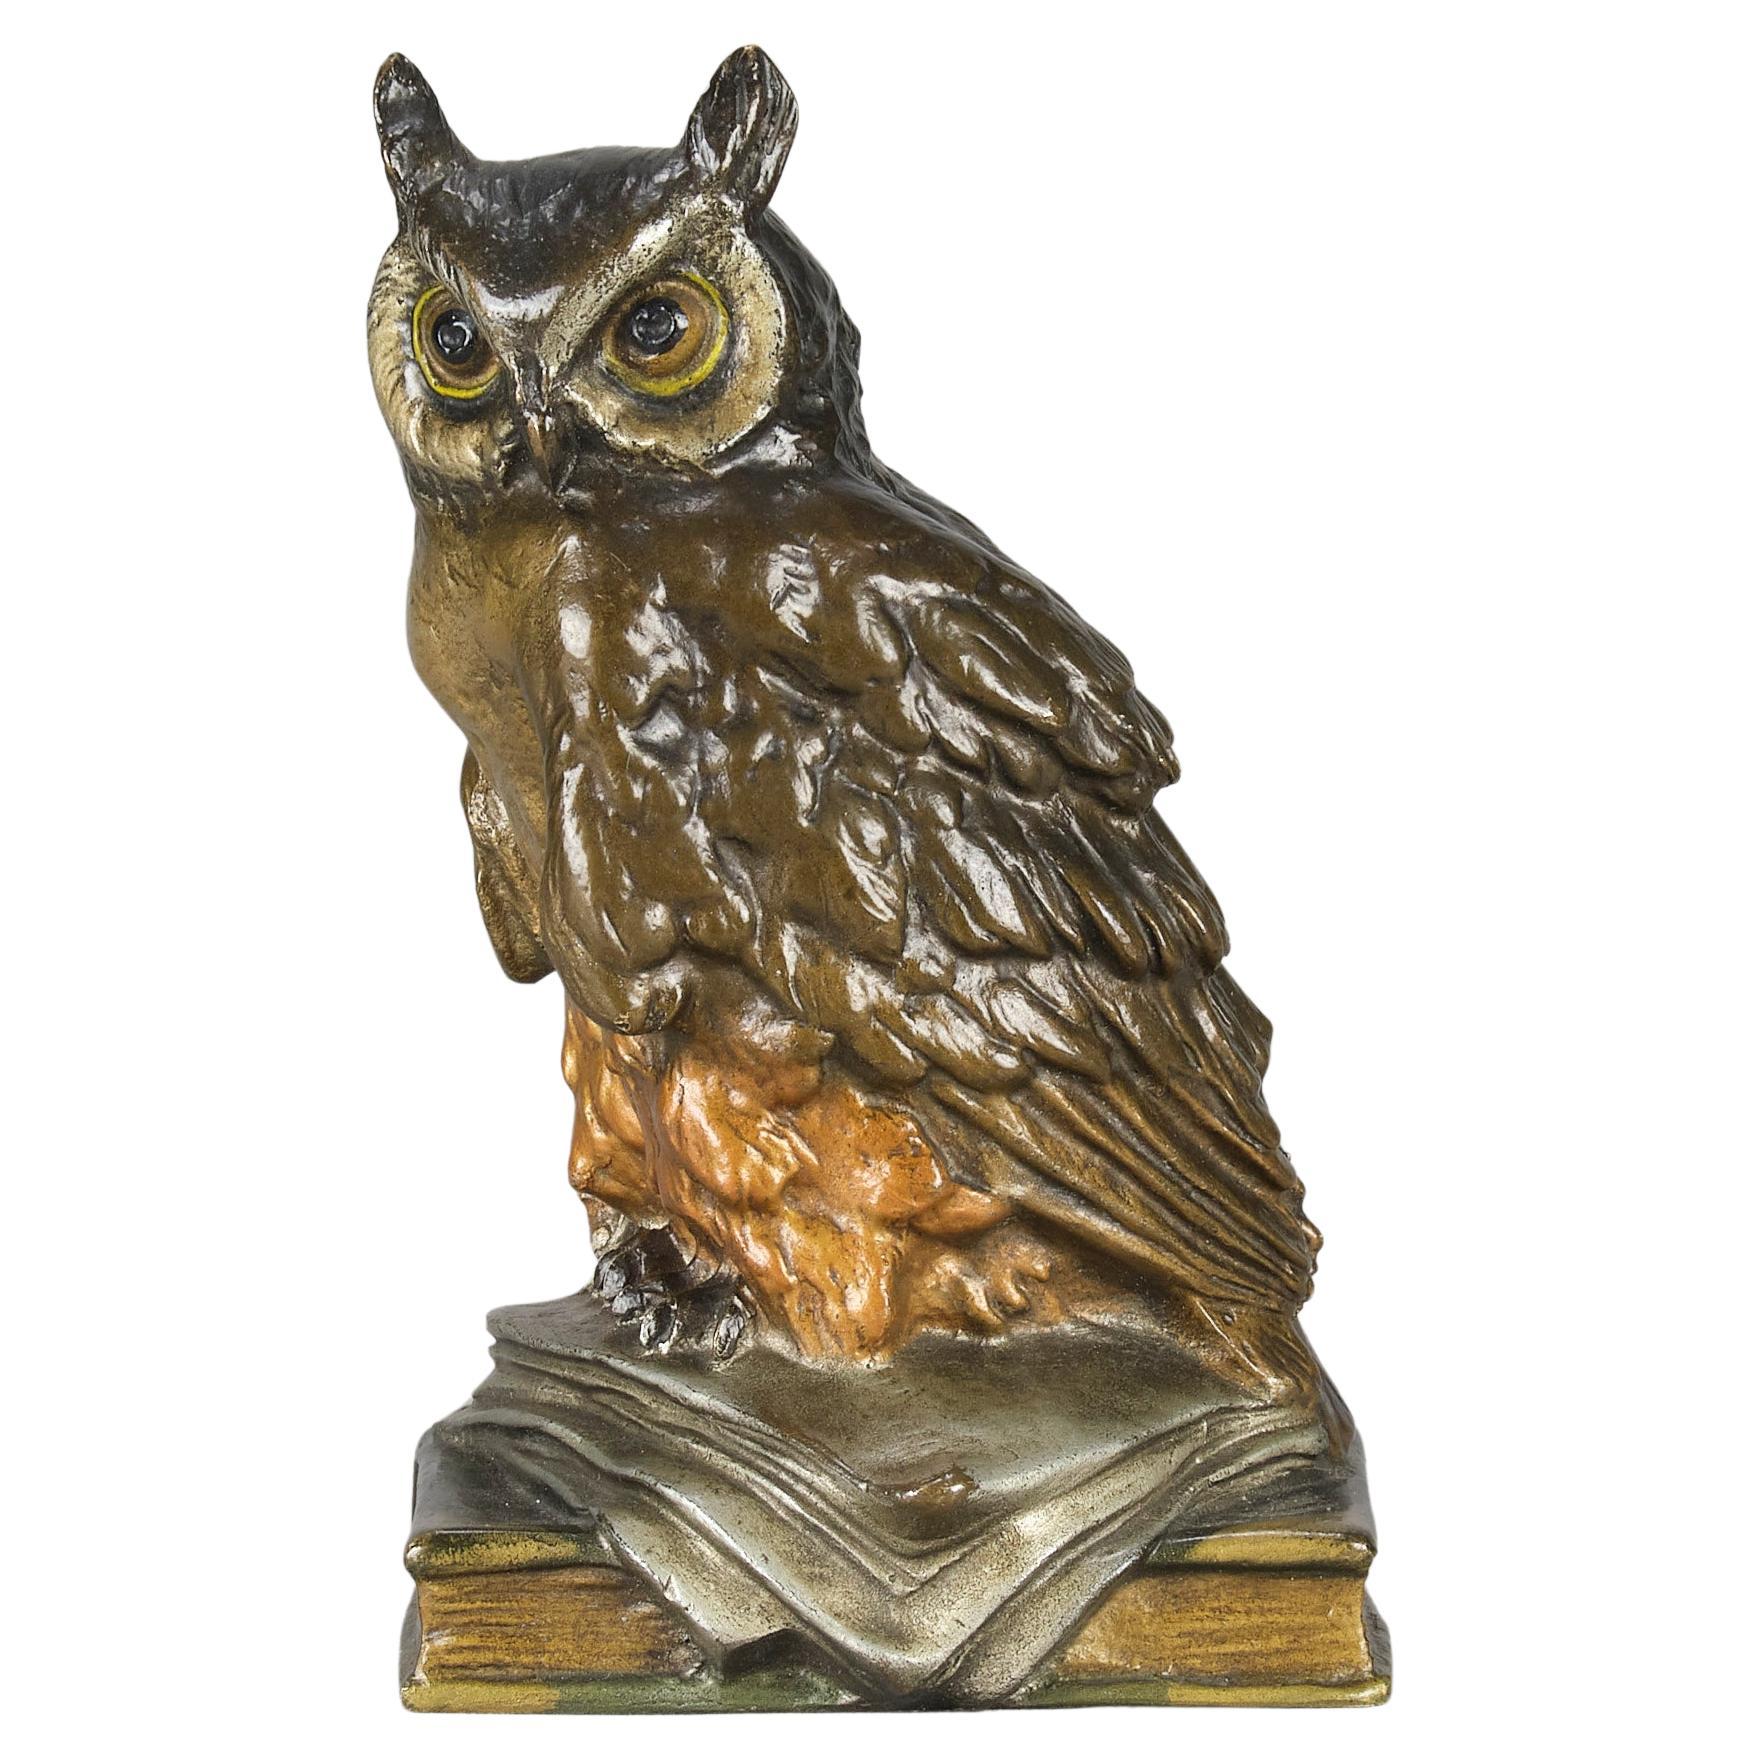 Early 20th Century Cold-Painted Bronze Sculpture "Wise Owl" by Franz Bergman For Sale